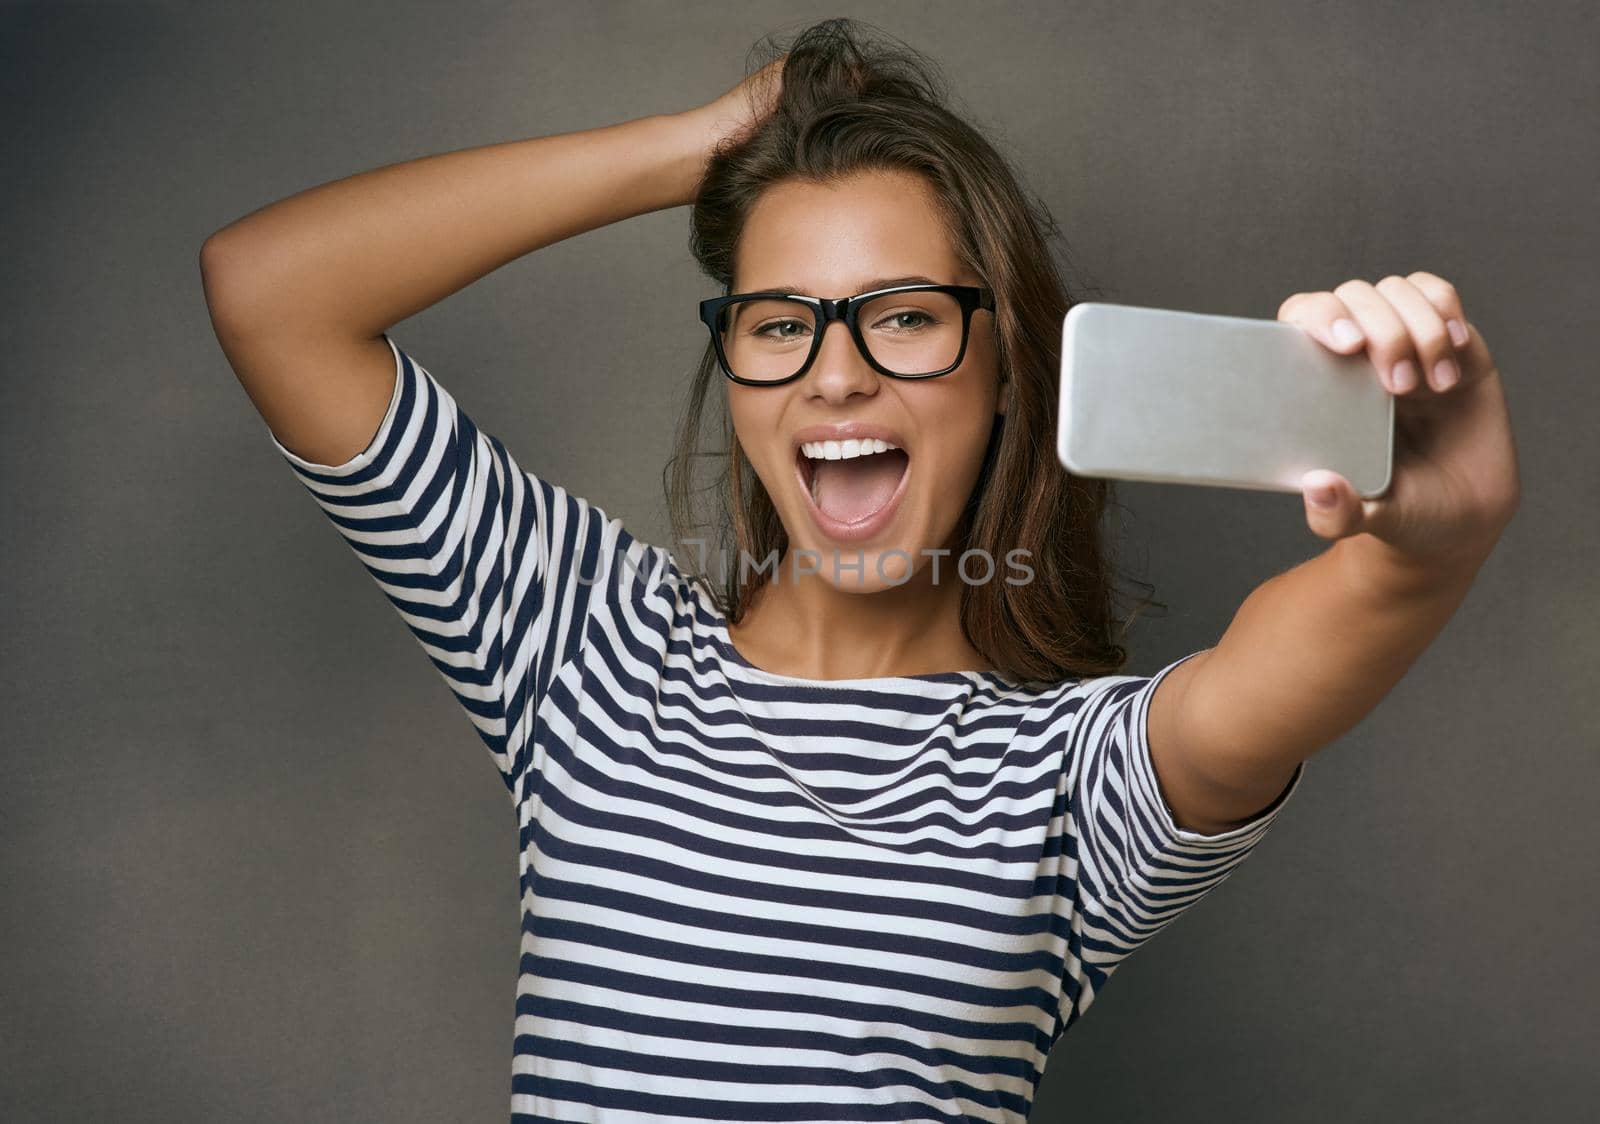 Studio shot of an attractive young woman taking a selfie against a grey background.